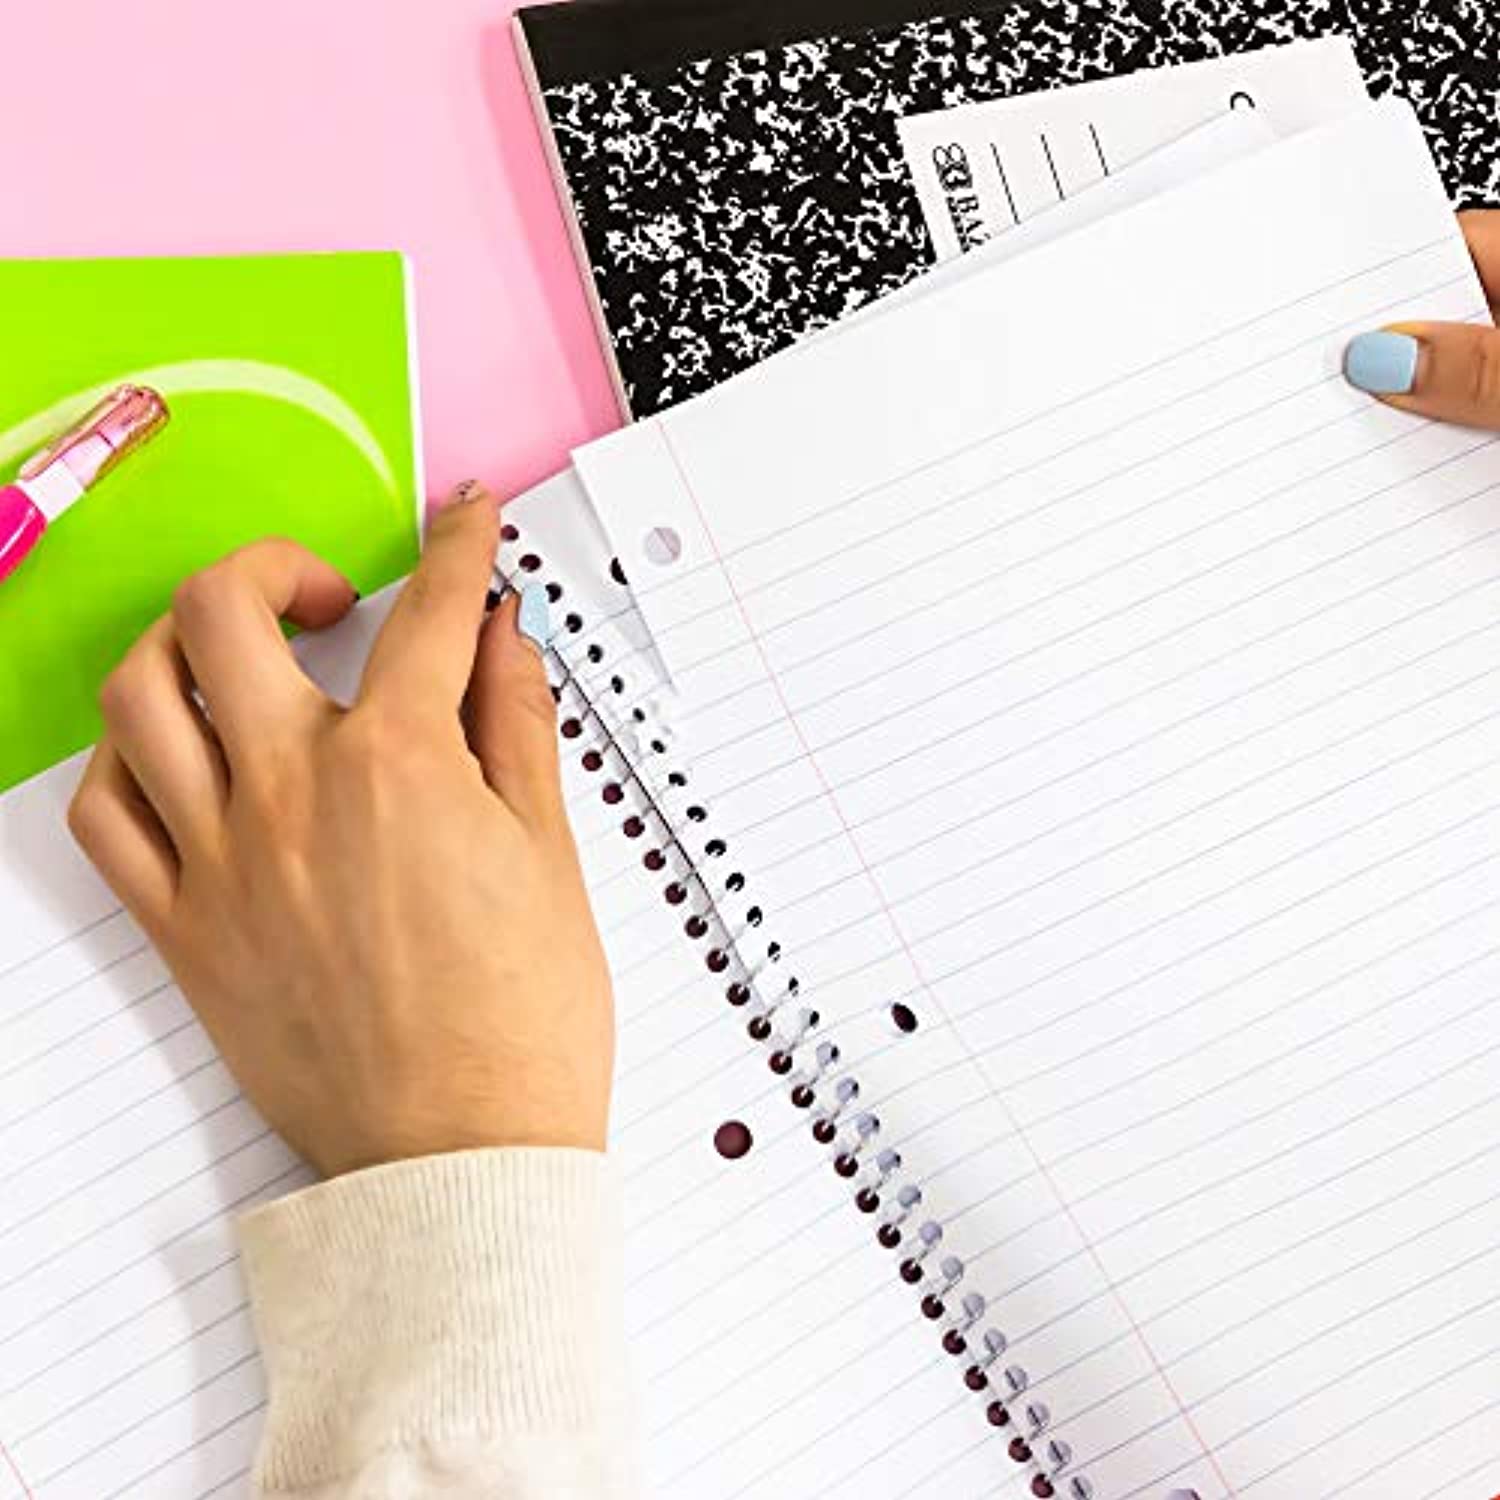 BAZIC Wide Ruled 120 Sheets 3-Subject Spiral Notebook, Writing Journal Dairy Assignment with Lined Notebooks, for Office Class Students, 6-Pack.